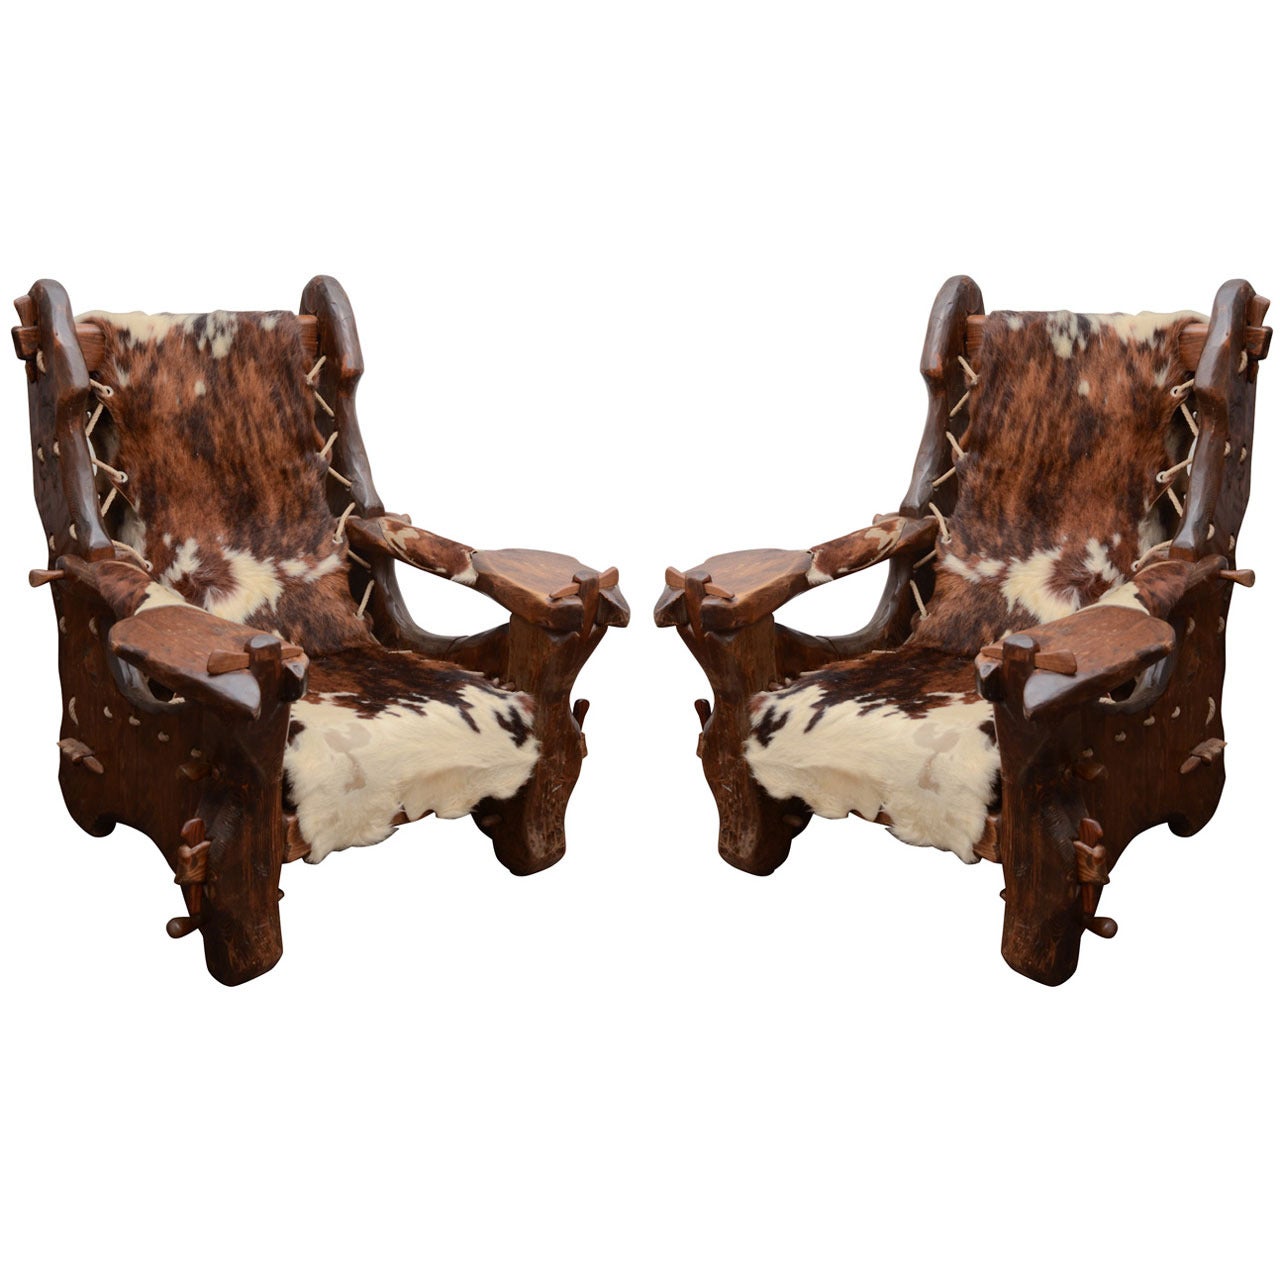 Pair of Pine and Cowhide Armchairs by Georges Charpentier, France, c. 1973